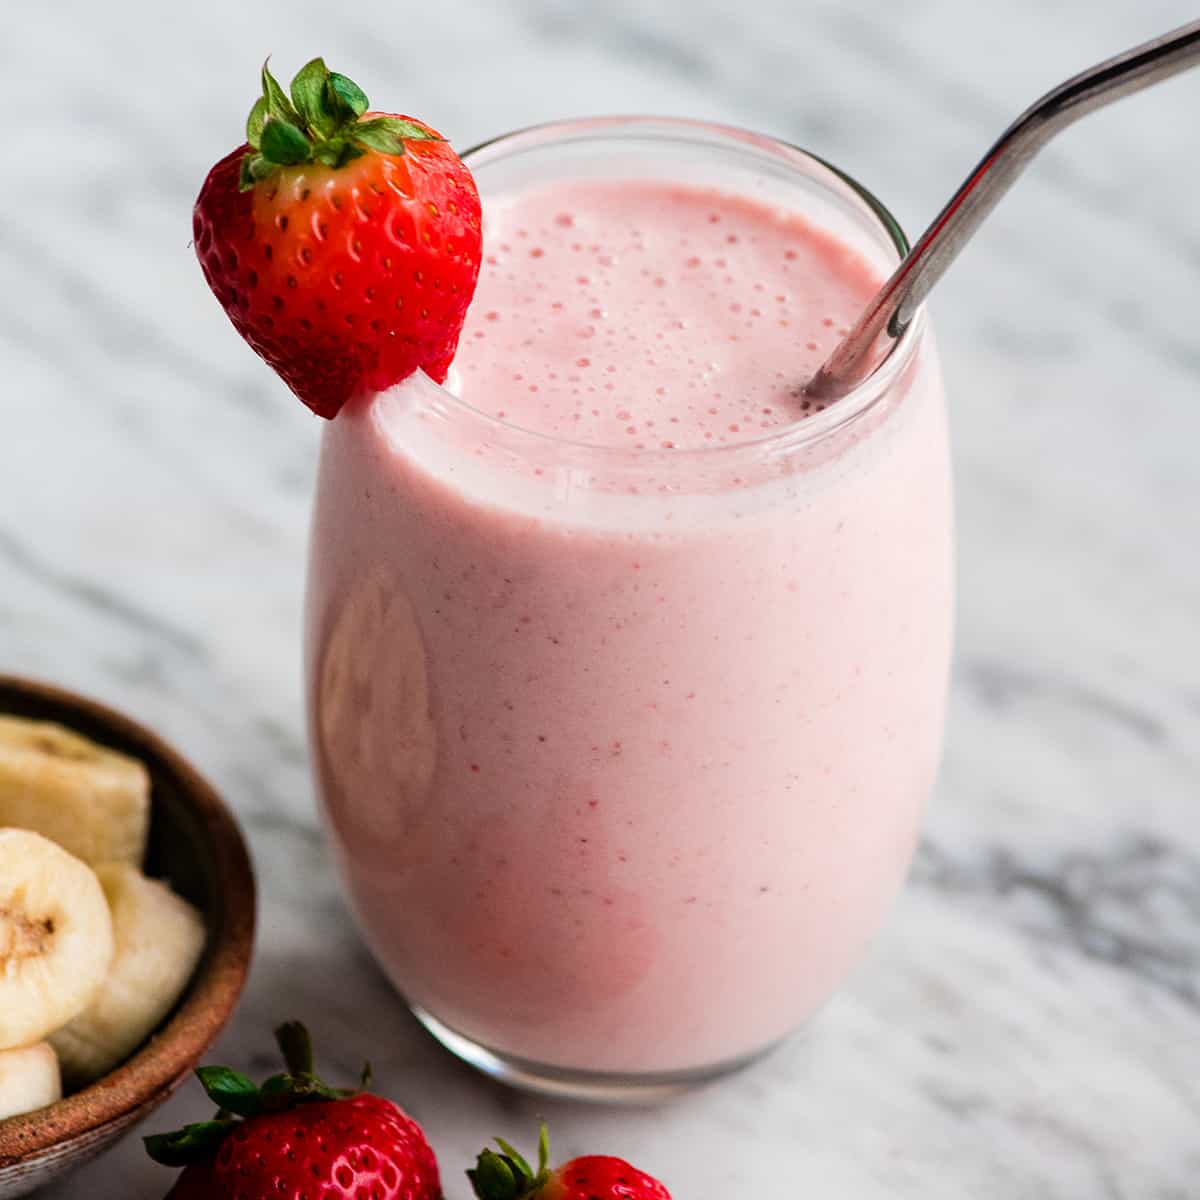  a glass filled with strawberry banana smoothie with a straw and strawberries.